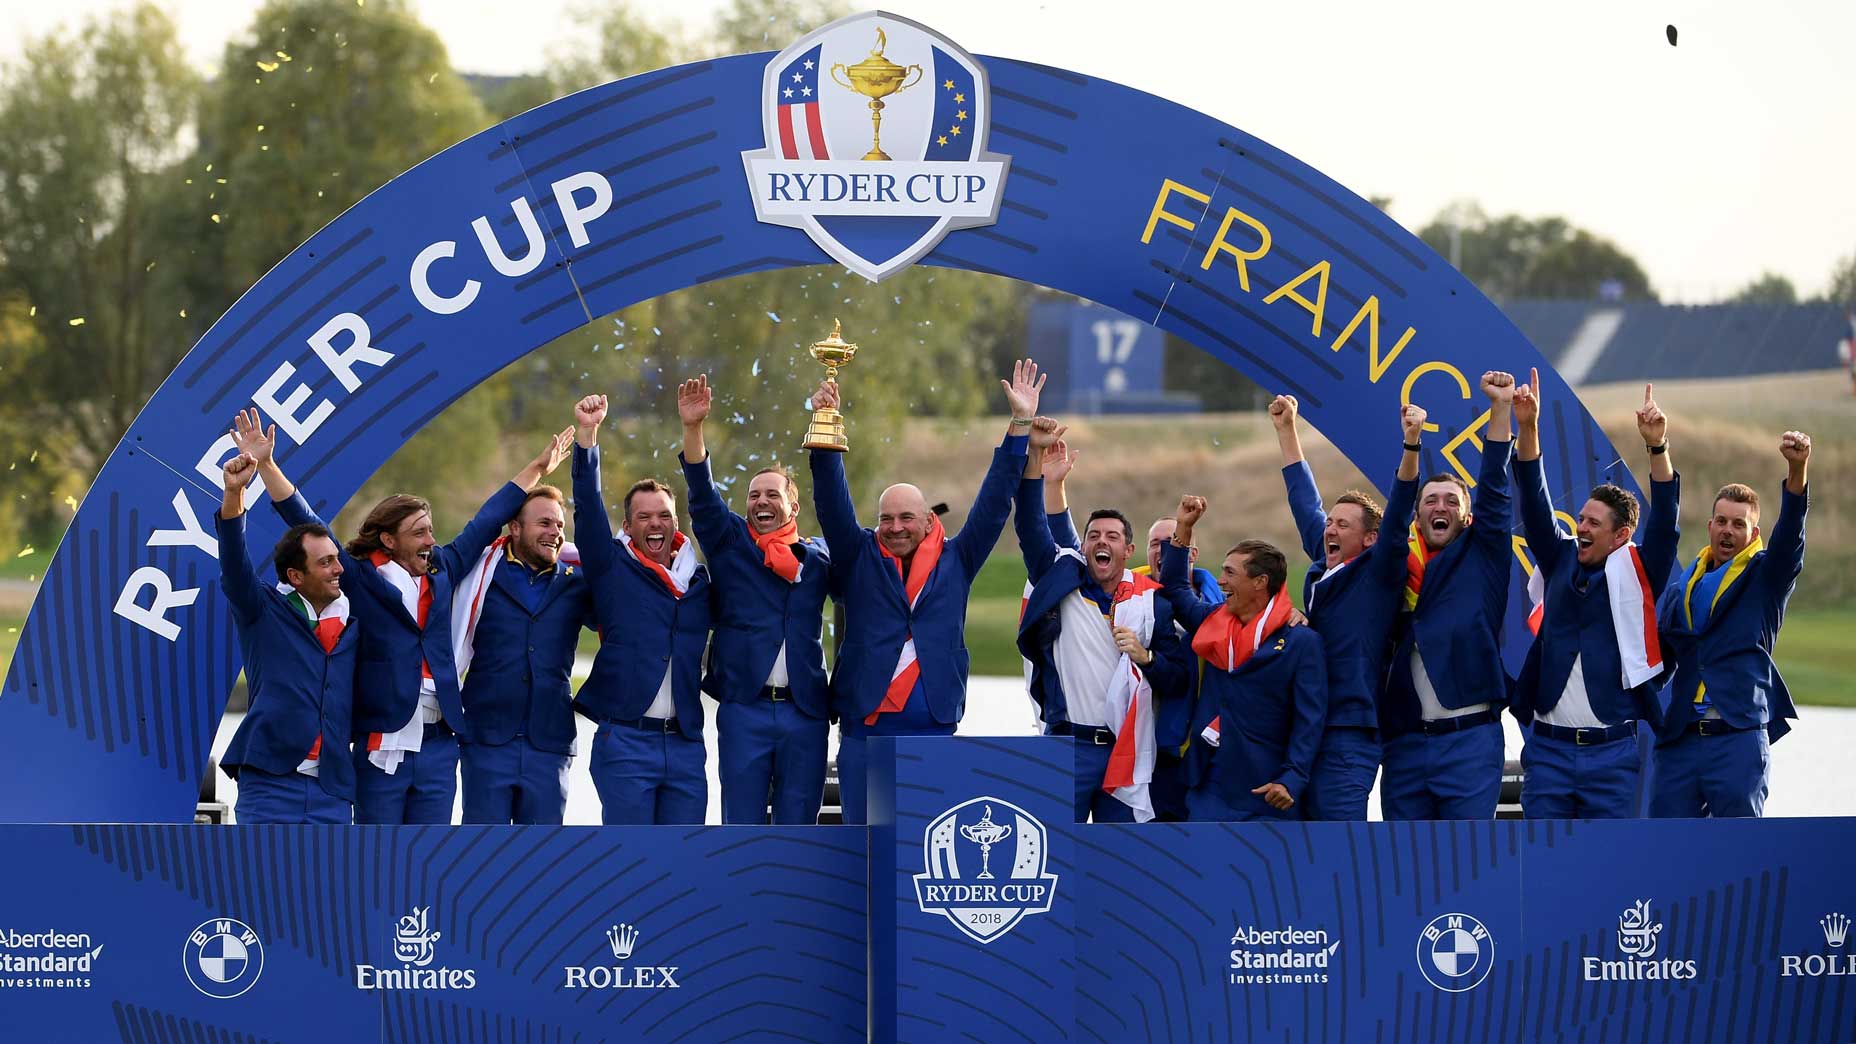 Ryder Cup history Who won the previous Ryder Cup?